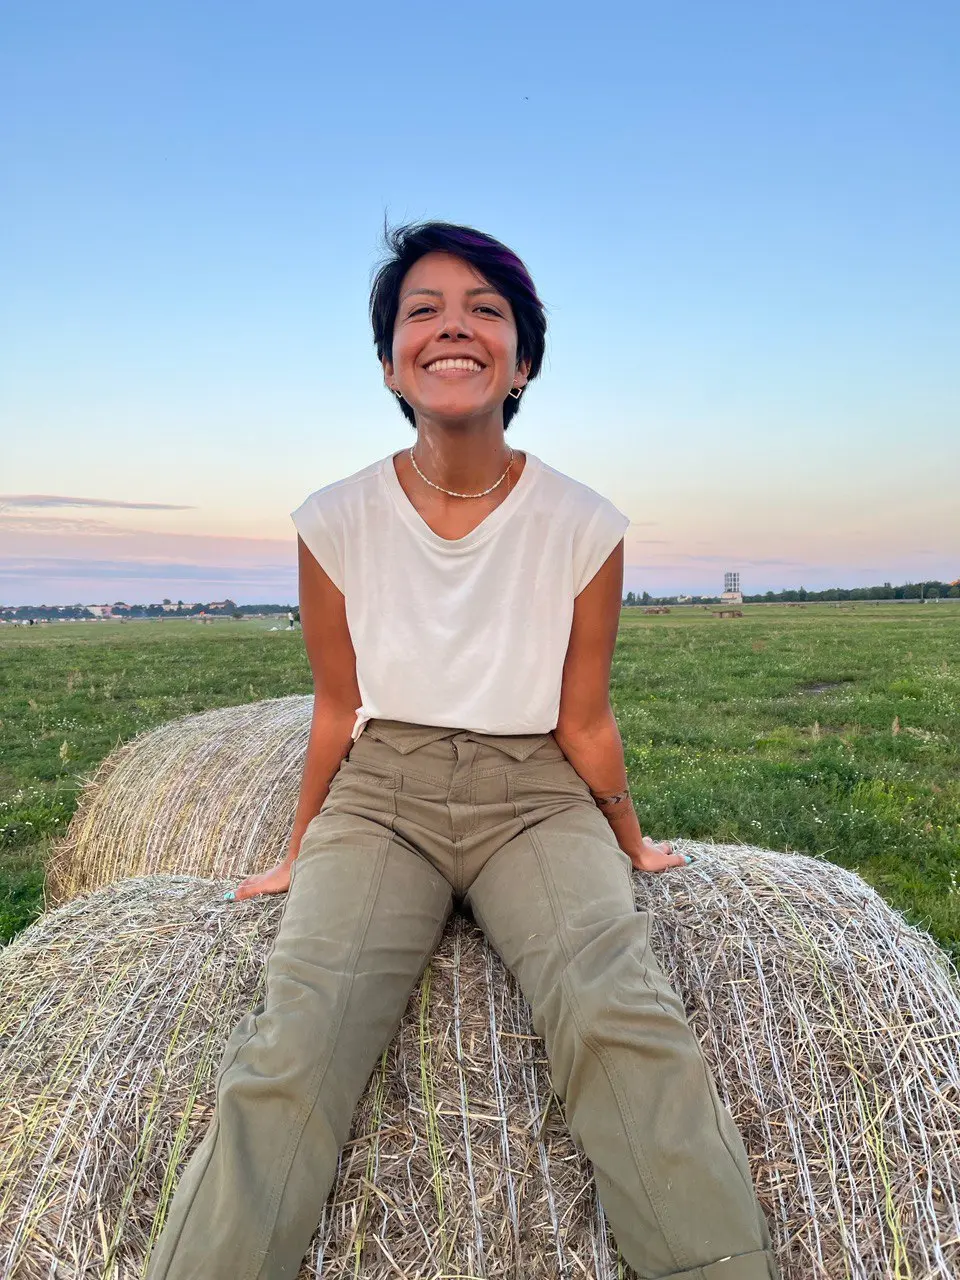 Me in a tipical sunset at Tempelhof. I'm sitting on top of a bale of hay.